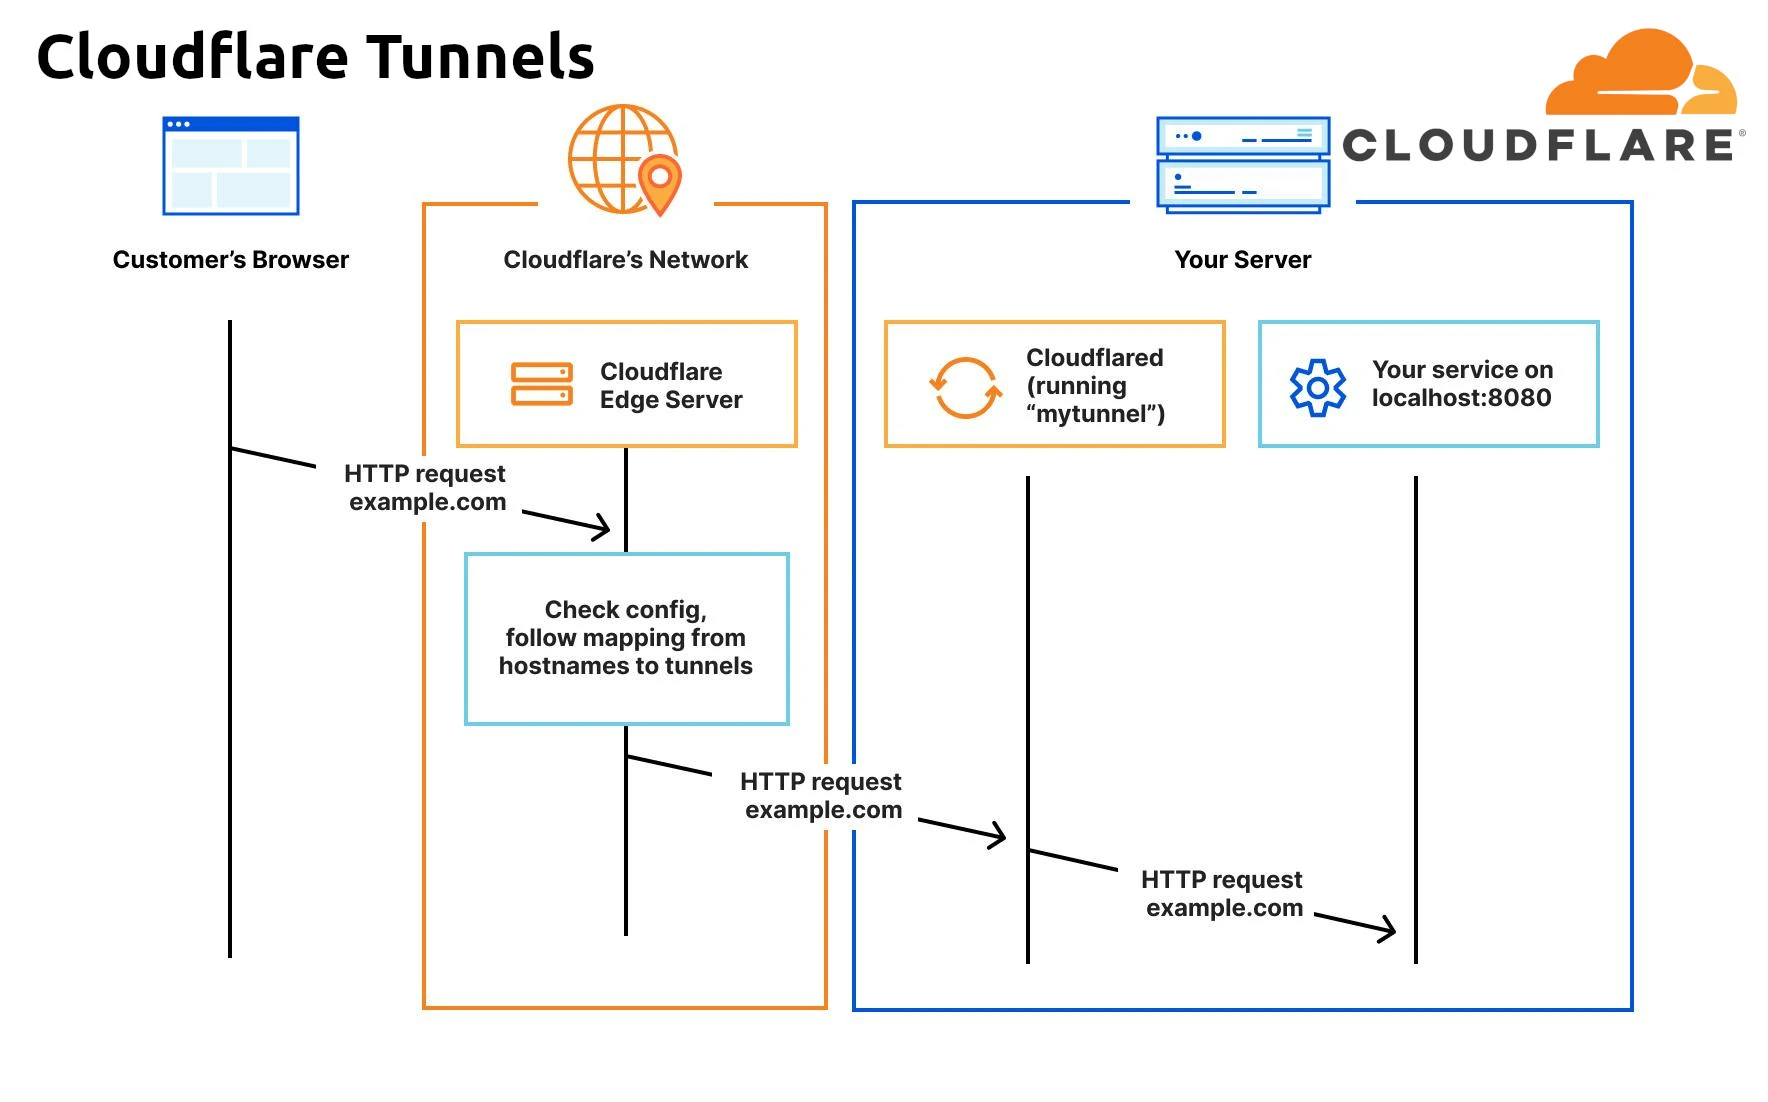 cloudflare tunnels